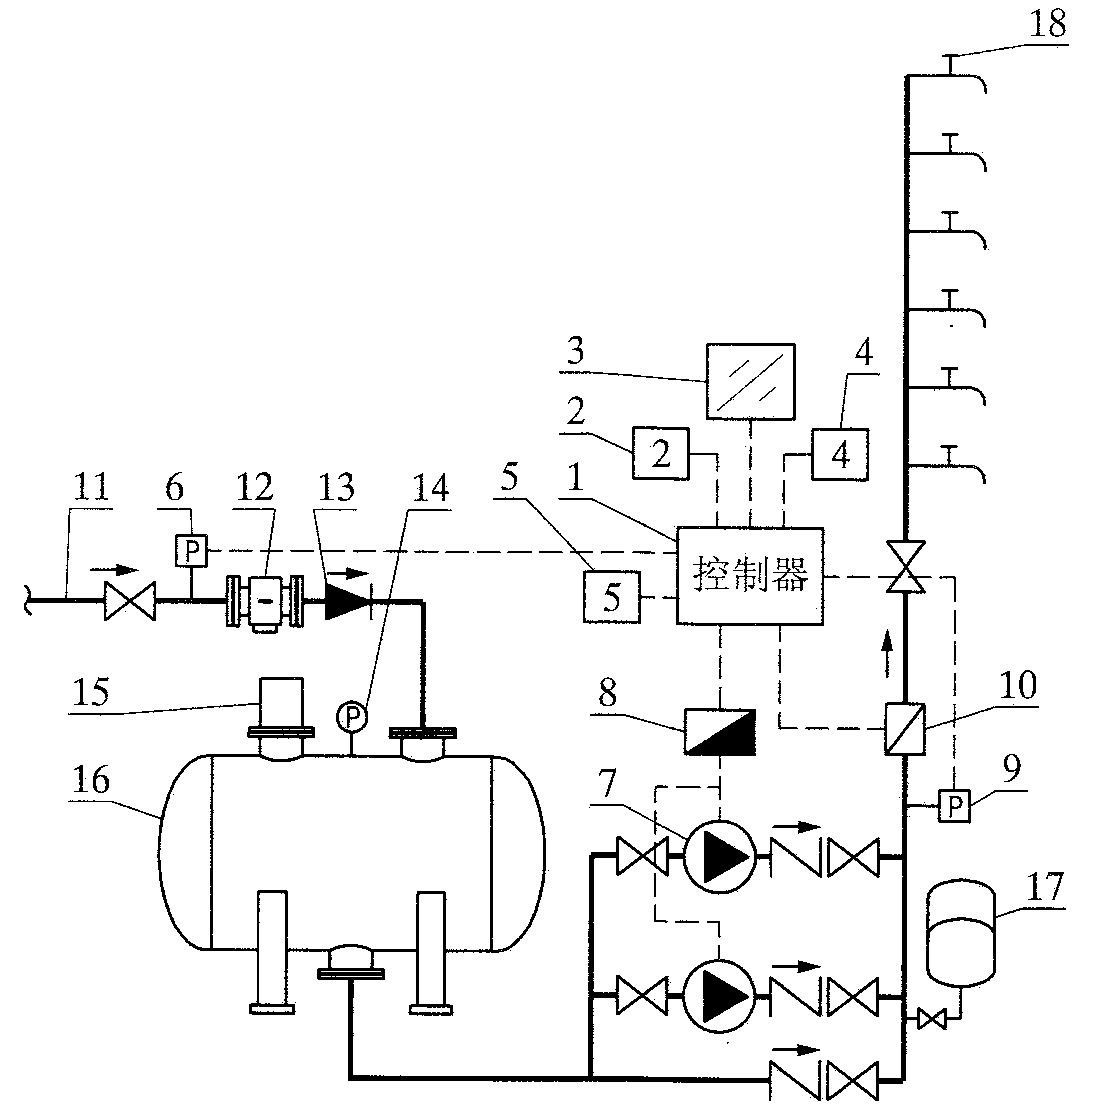 Overlying network secondary water supply energy saving controlling device